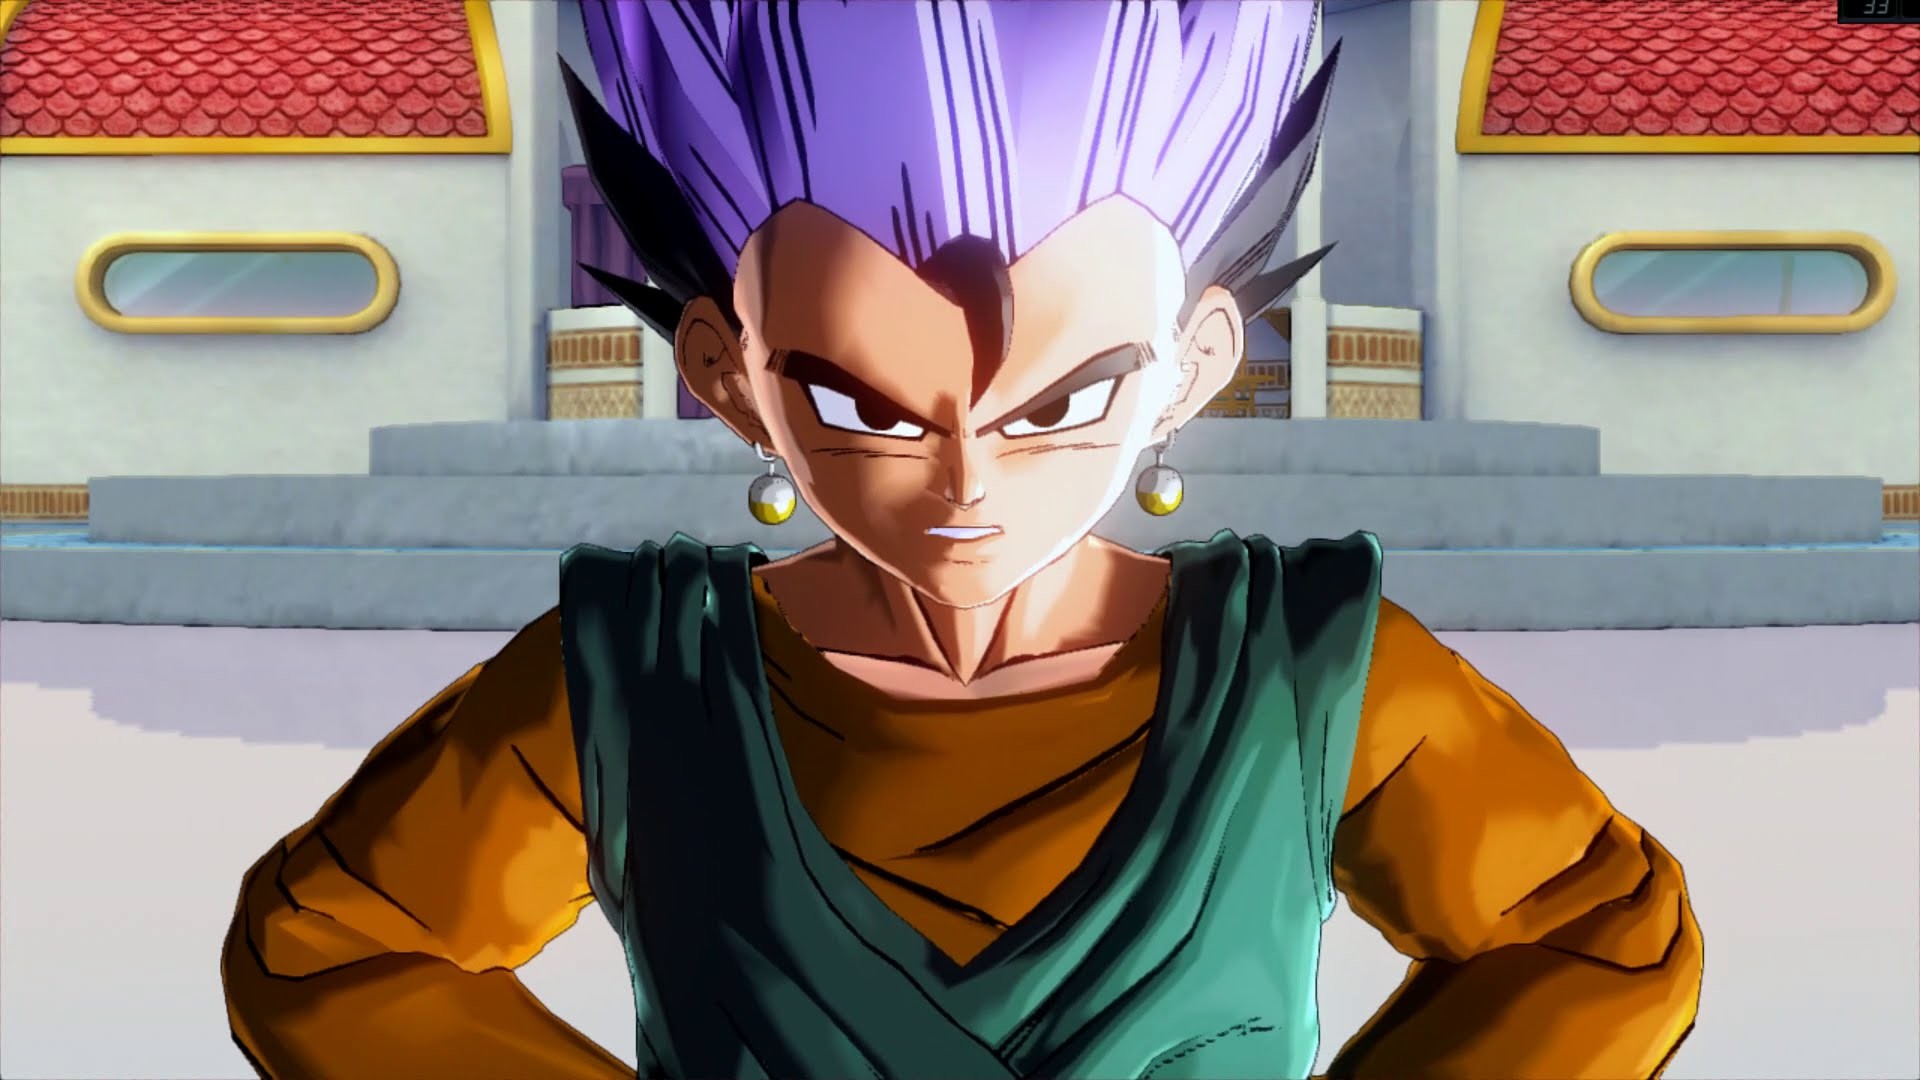 1920x1080 Photos of Trunks Character Trunks Character 1080p wallpapers ...